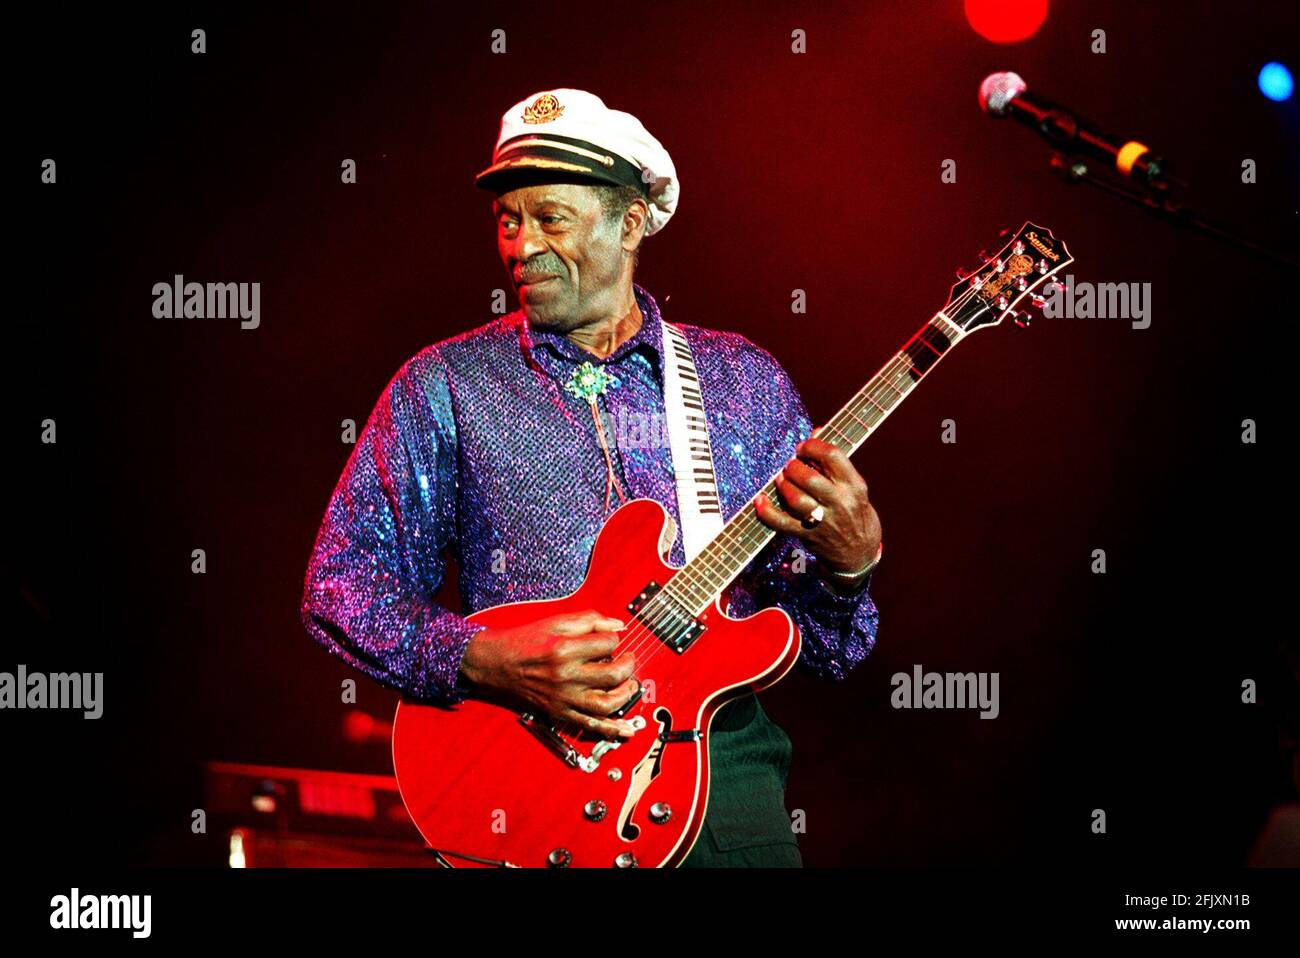 CHUCK BERRY WHO PLAYED AT THE LONDON ARENA, July 2000 as did JERRY LEE LEWIS AND LITTLE RICHARD.   11/7/2000 Stock Photo